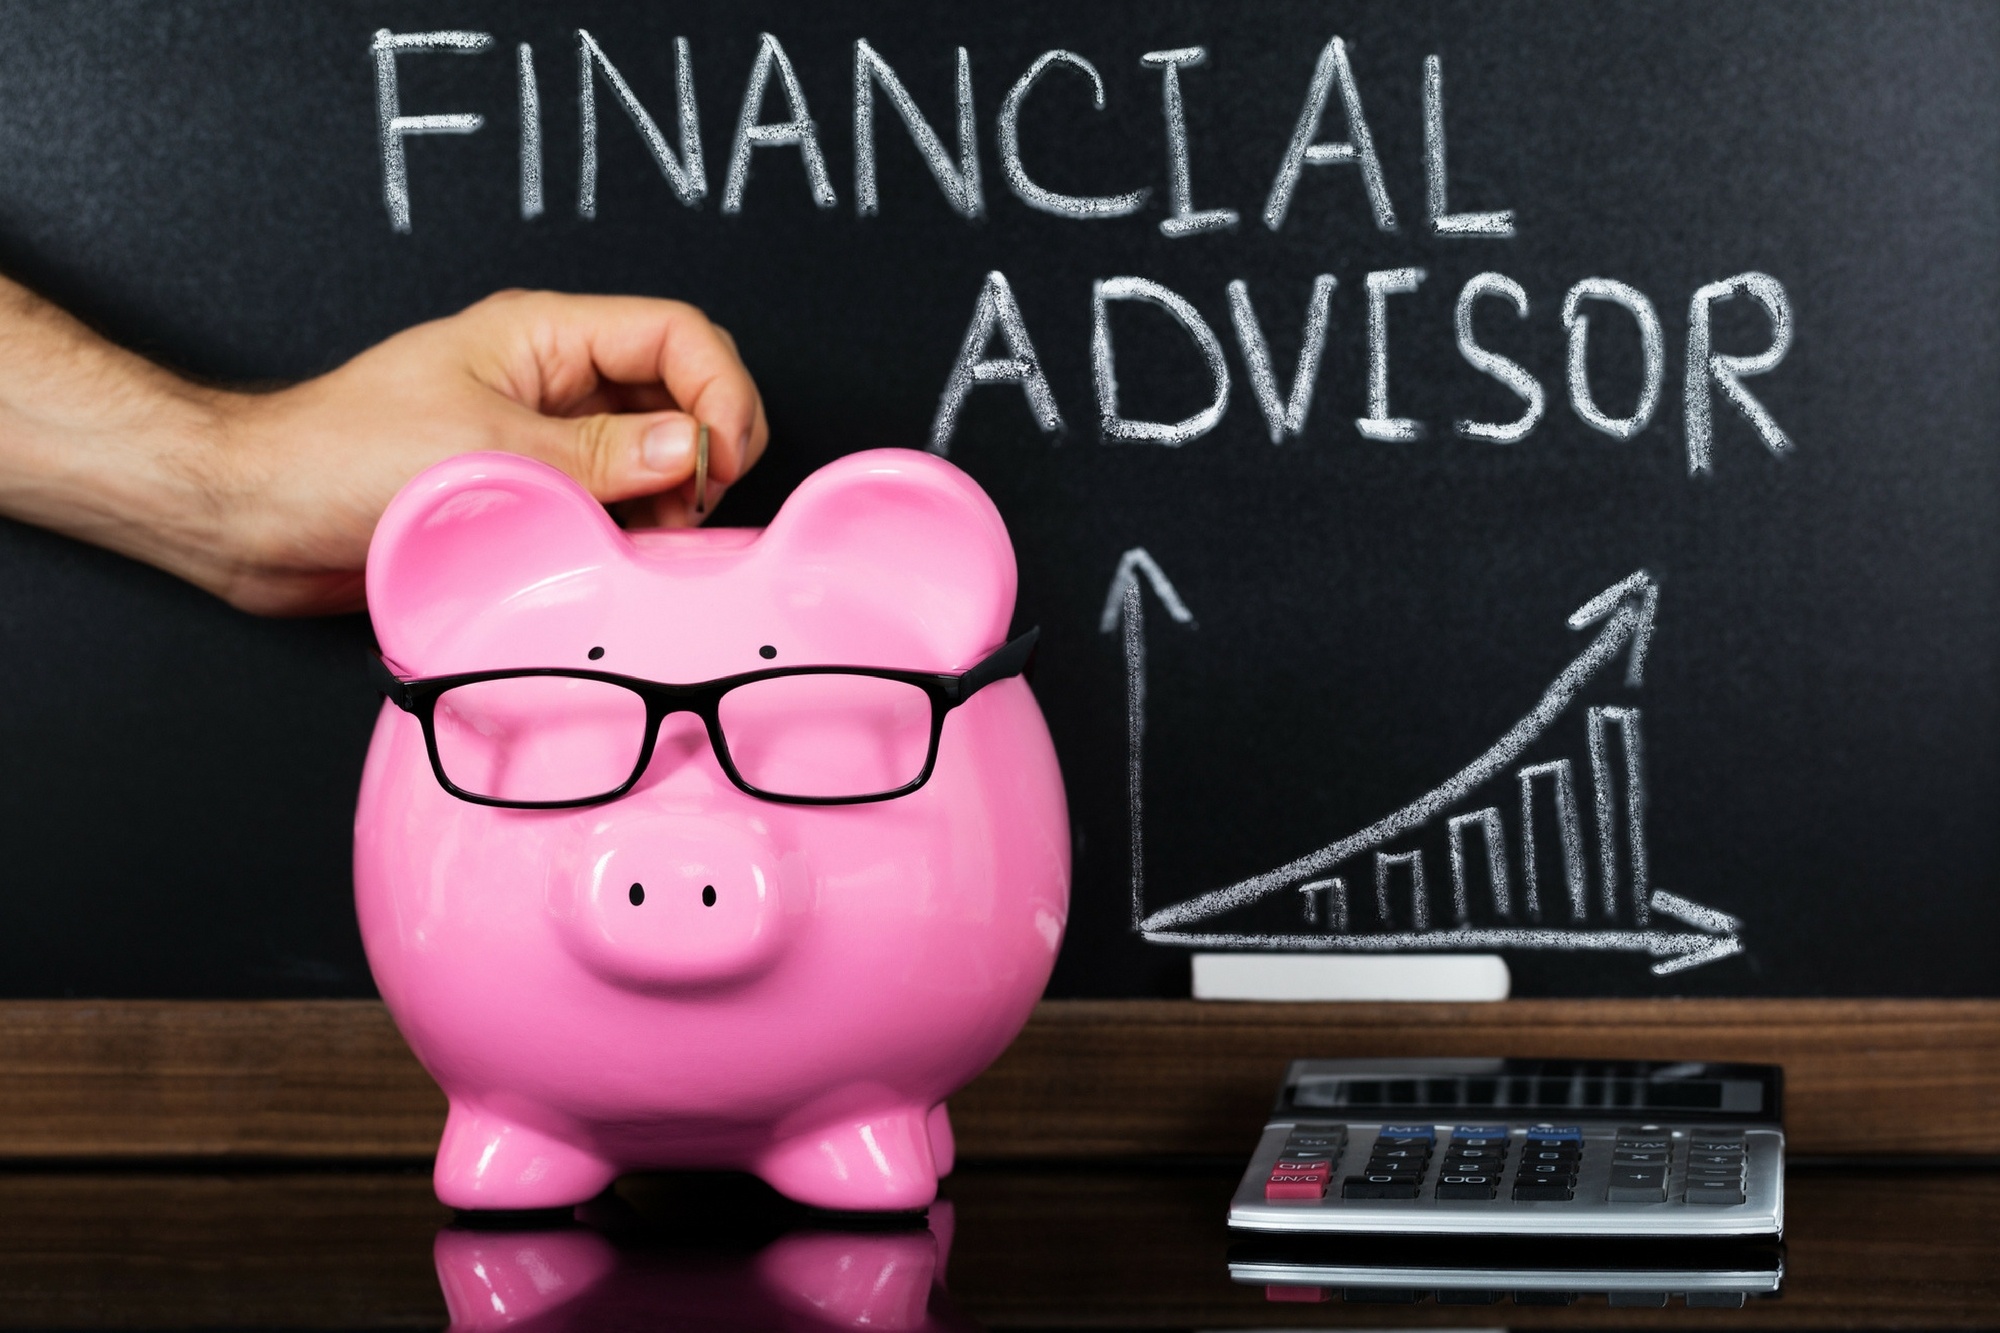 HOW TO GET RID OF YOUR FINANCIAL ADVISOR